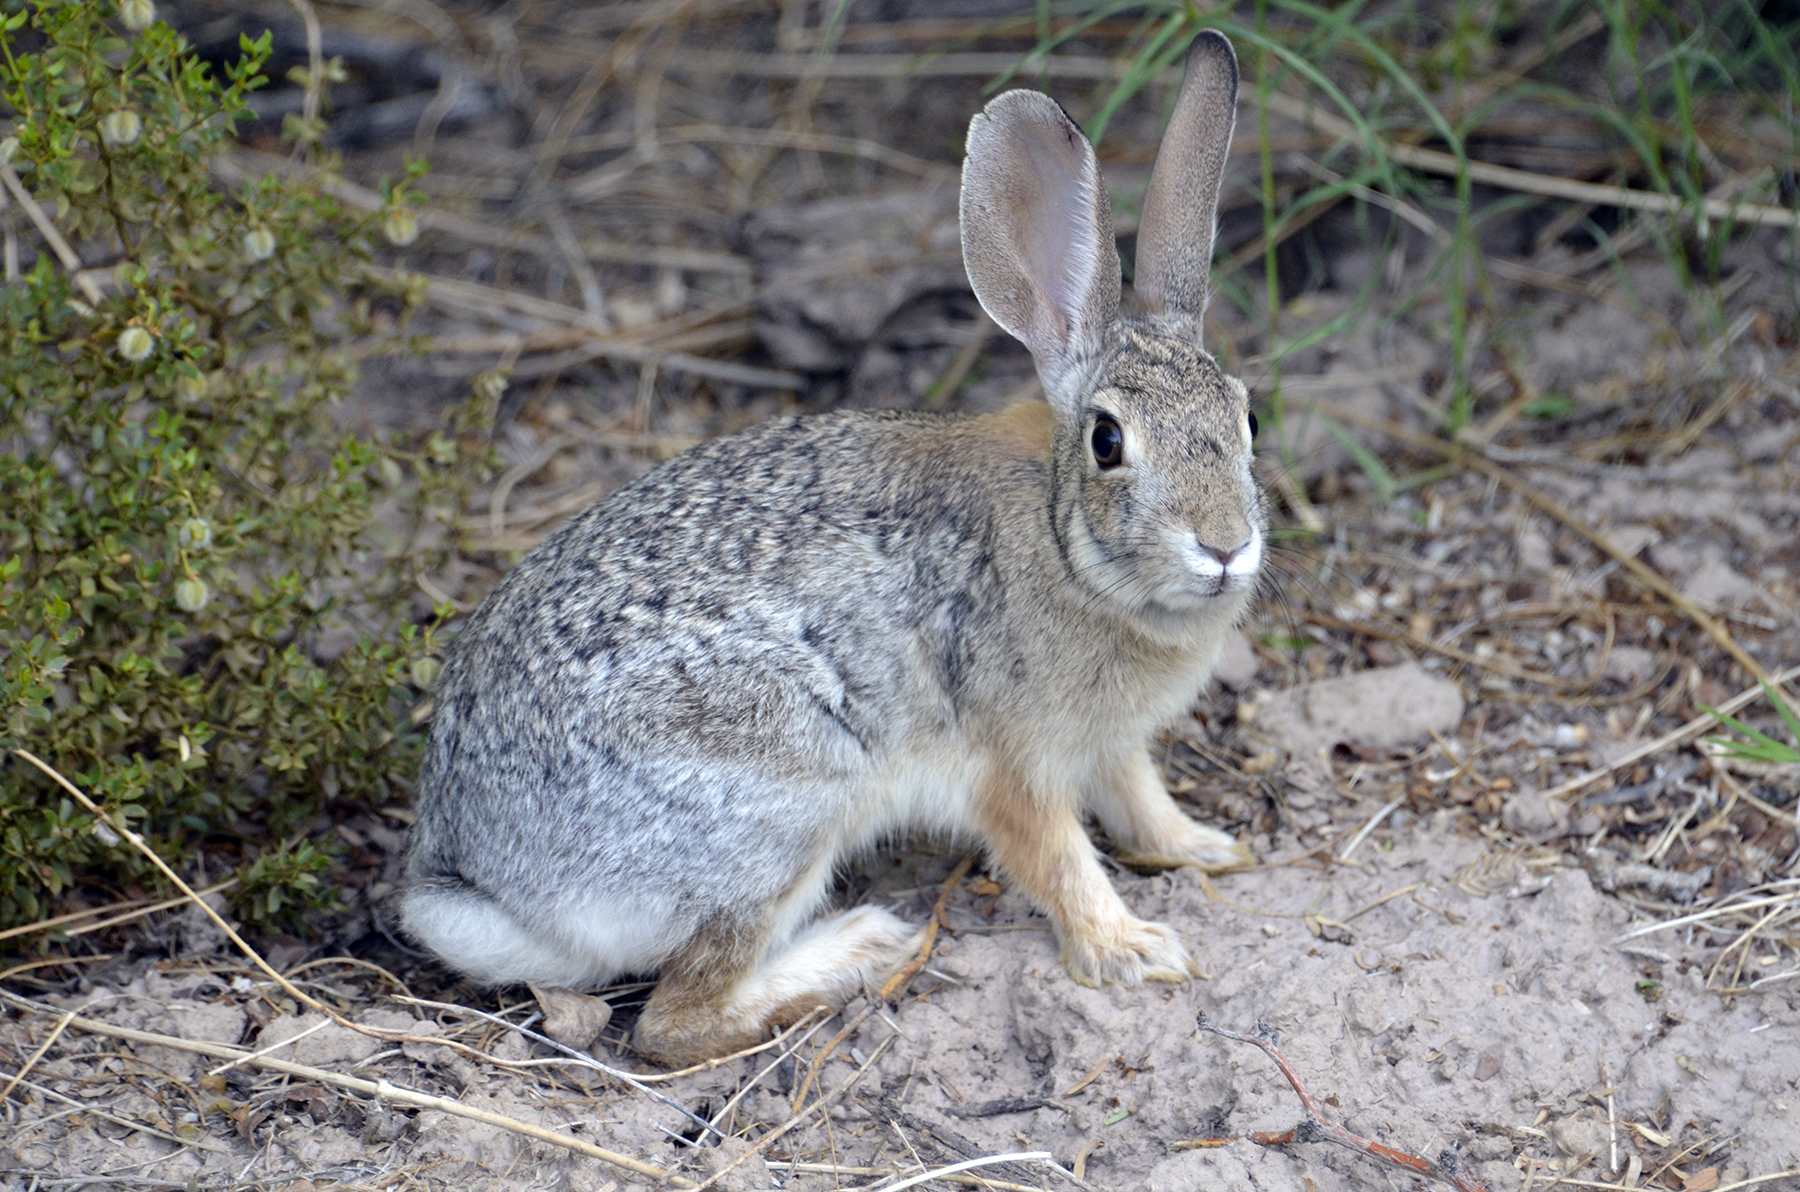 Desert Cottontail rabbit looking toward the viewer standing on dirt and plant to the left